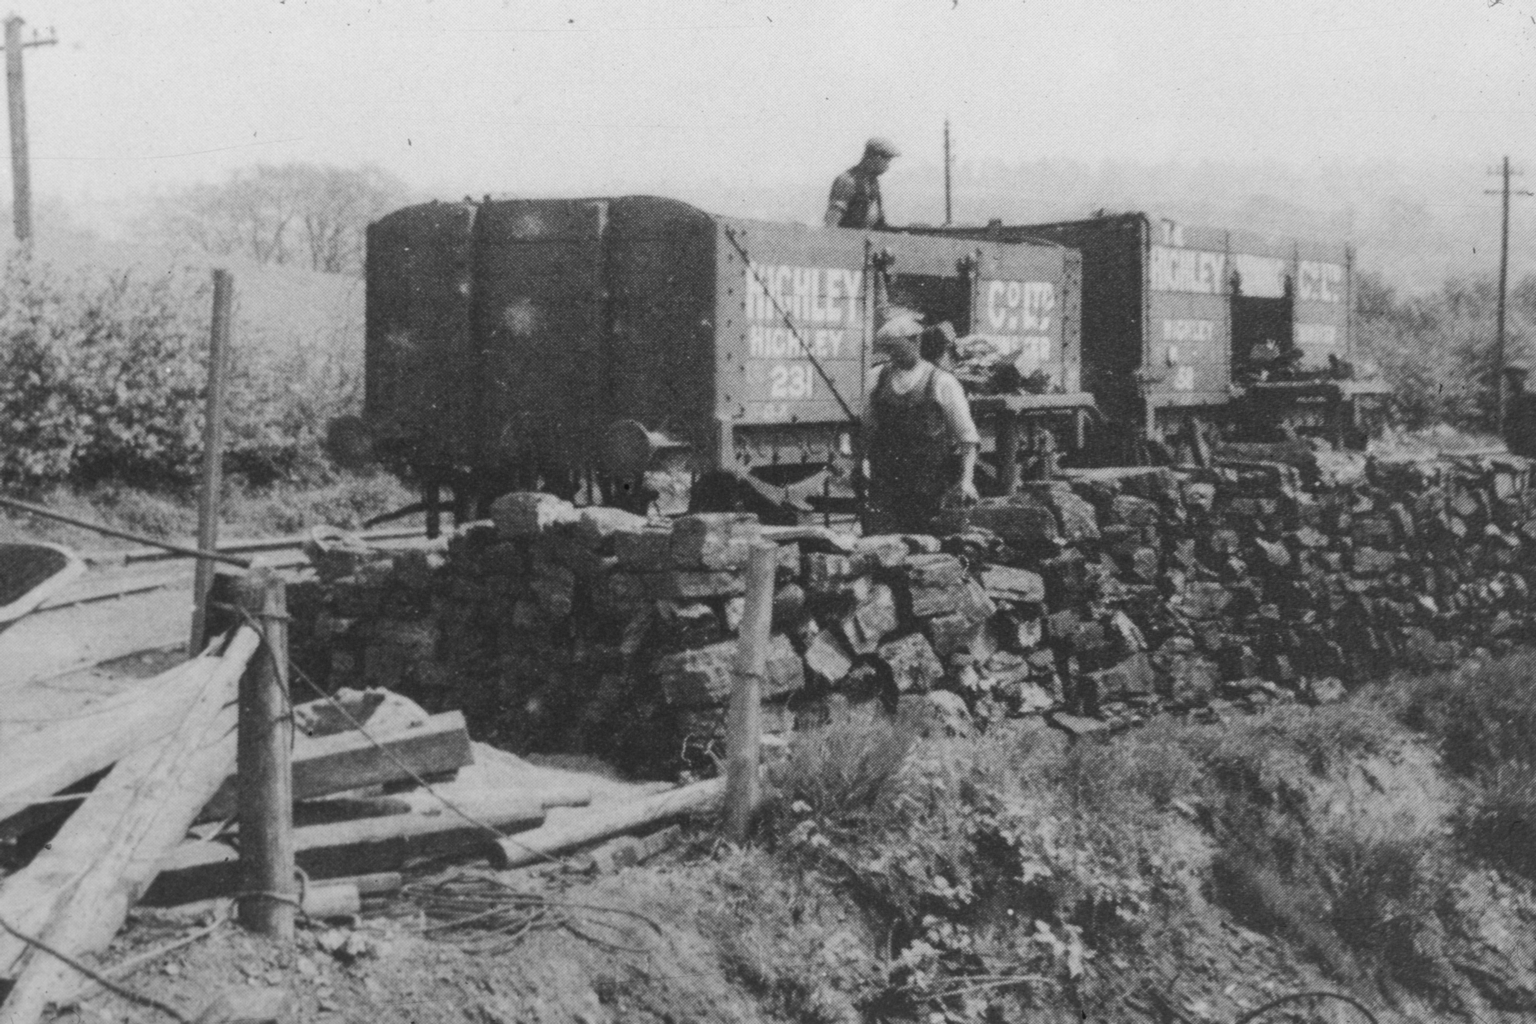 Miners loading railroad freight cars